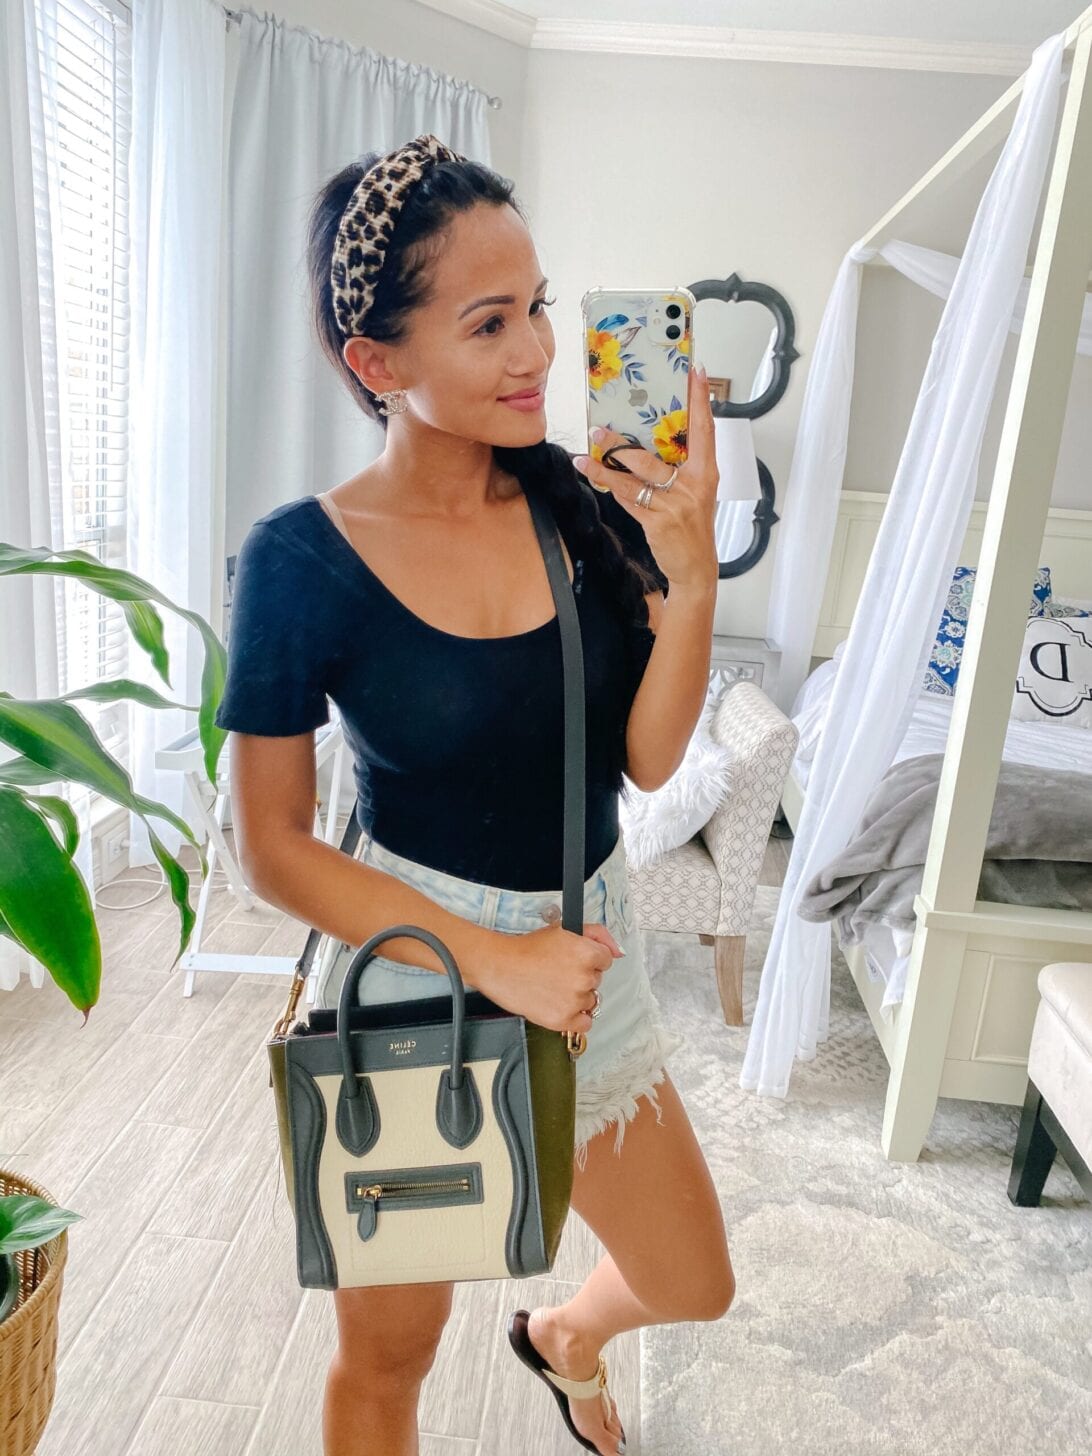 My bag of the week! Is the Nano Luggage still in style in 2022? : r/handbags